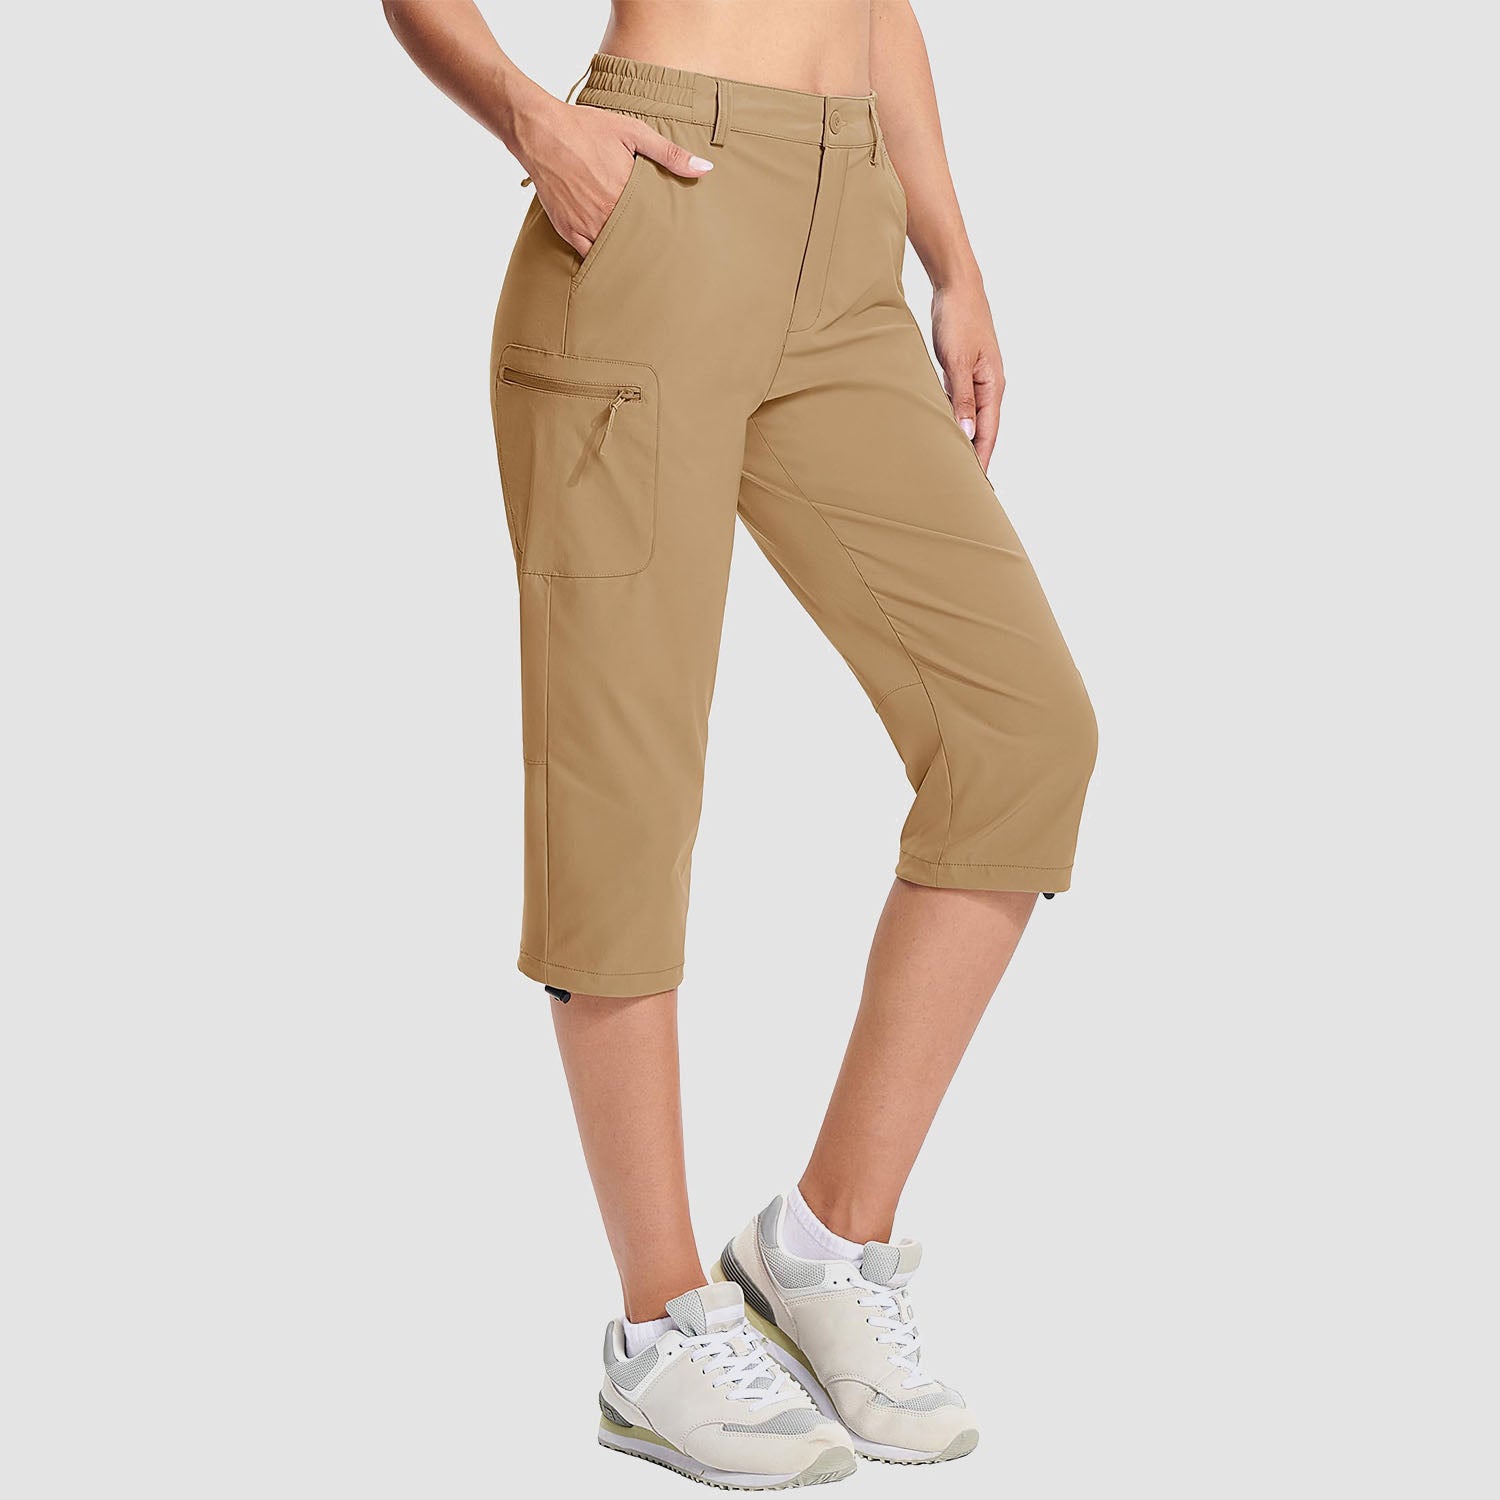 Women's Hiking Capris Lightweight Stretch Water Resistant Joggers